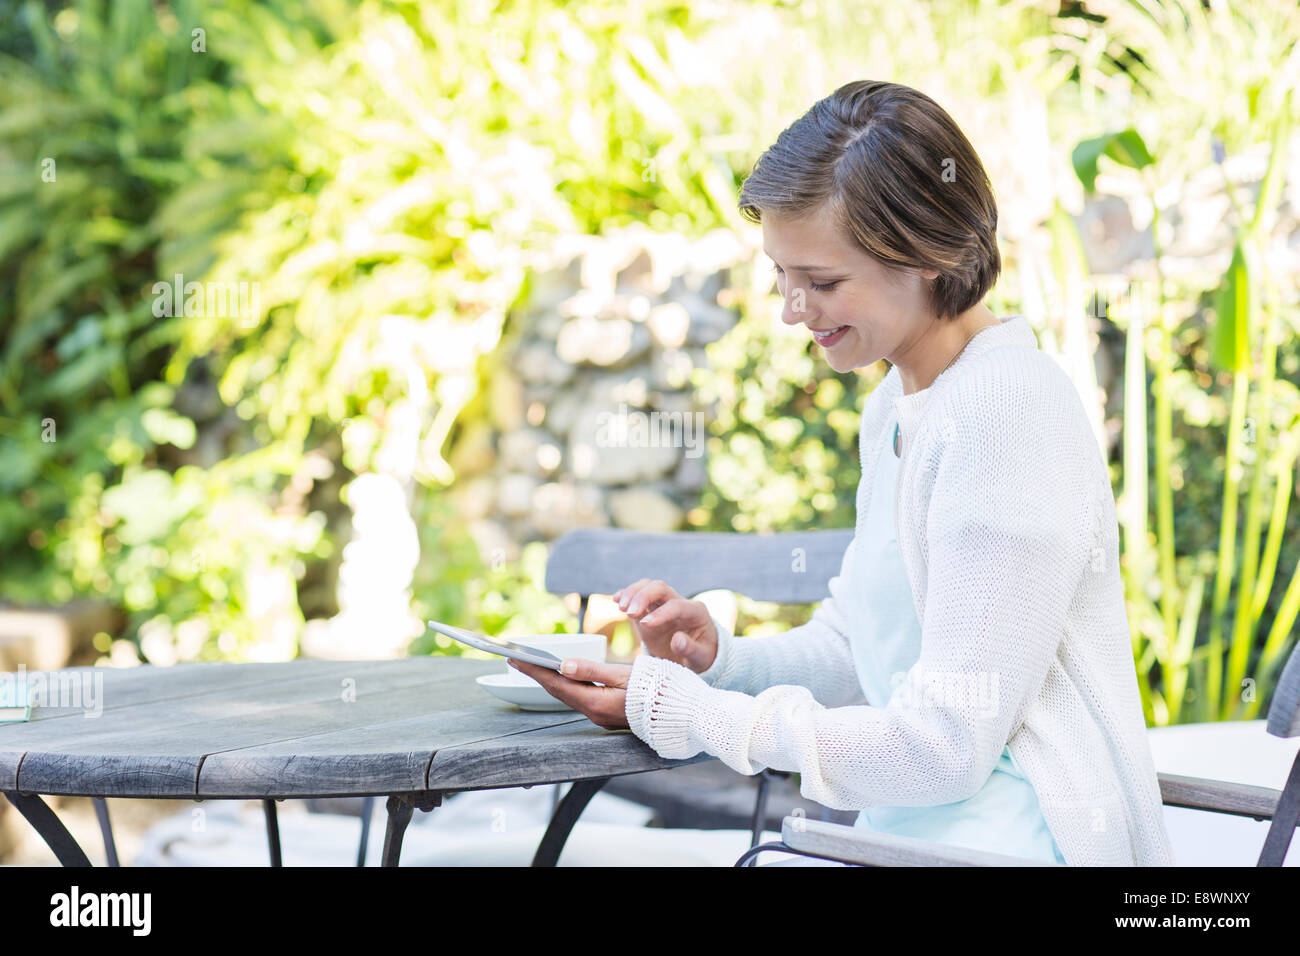 Woman using digital tablet at table outdoors Stock Photo